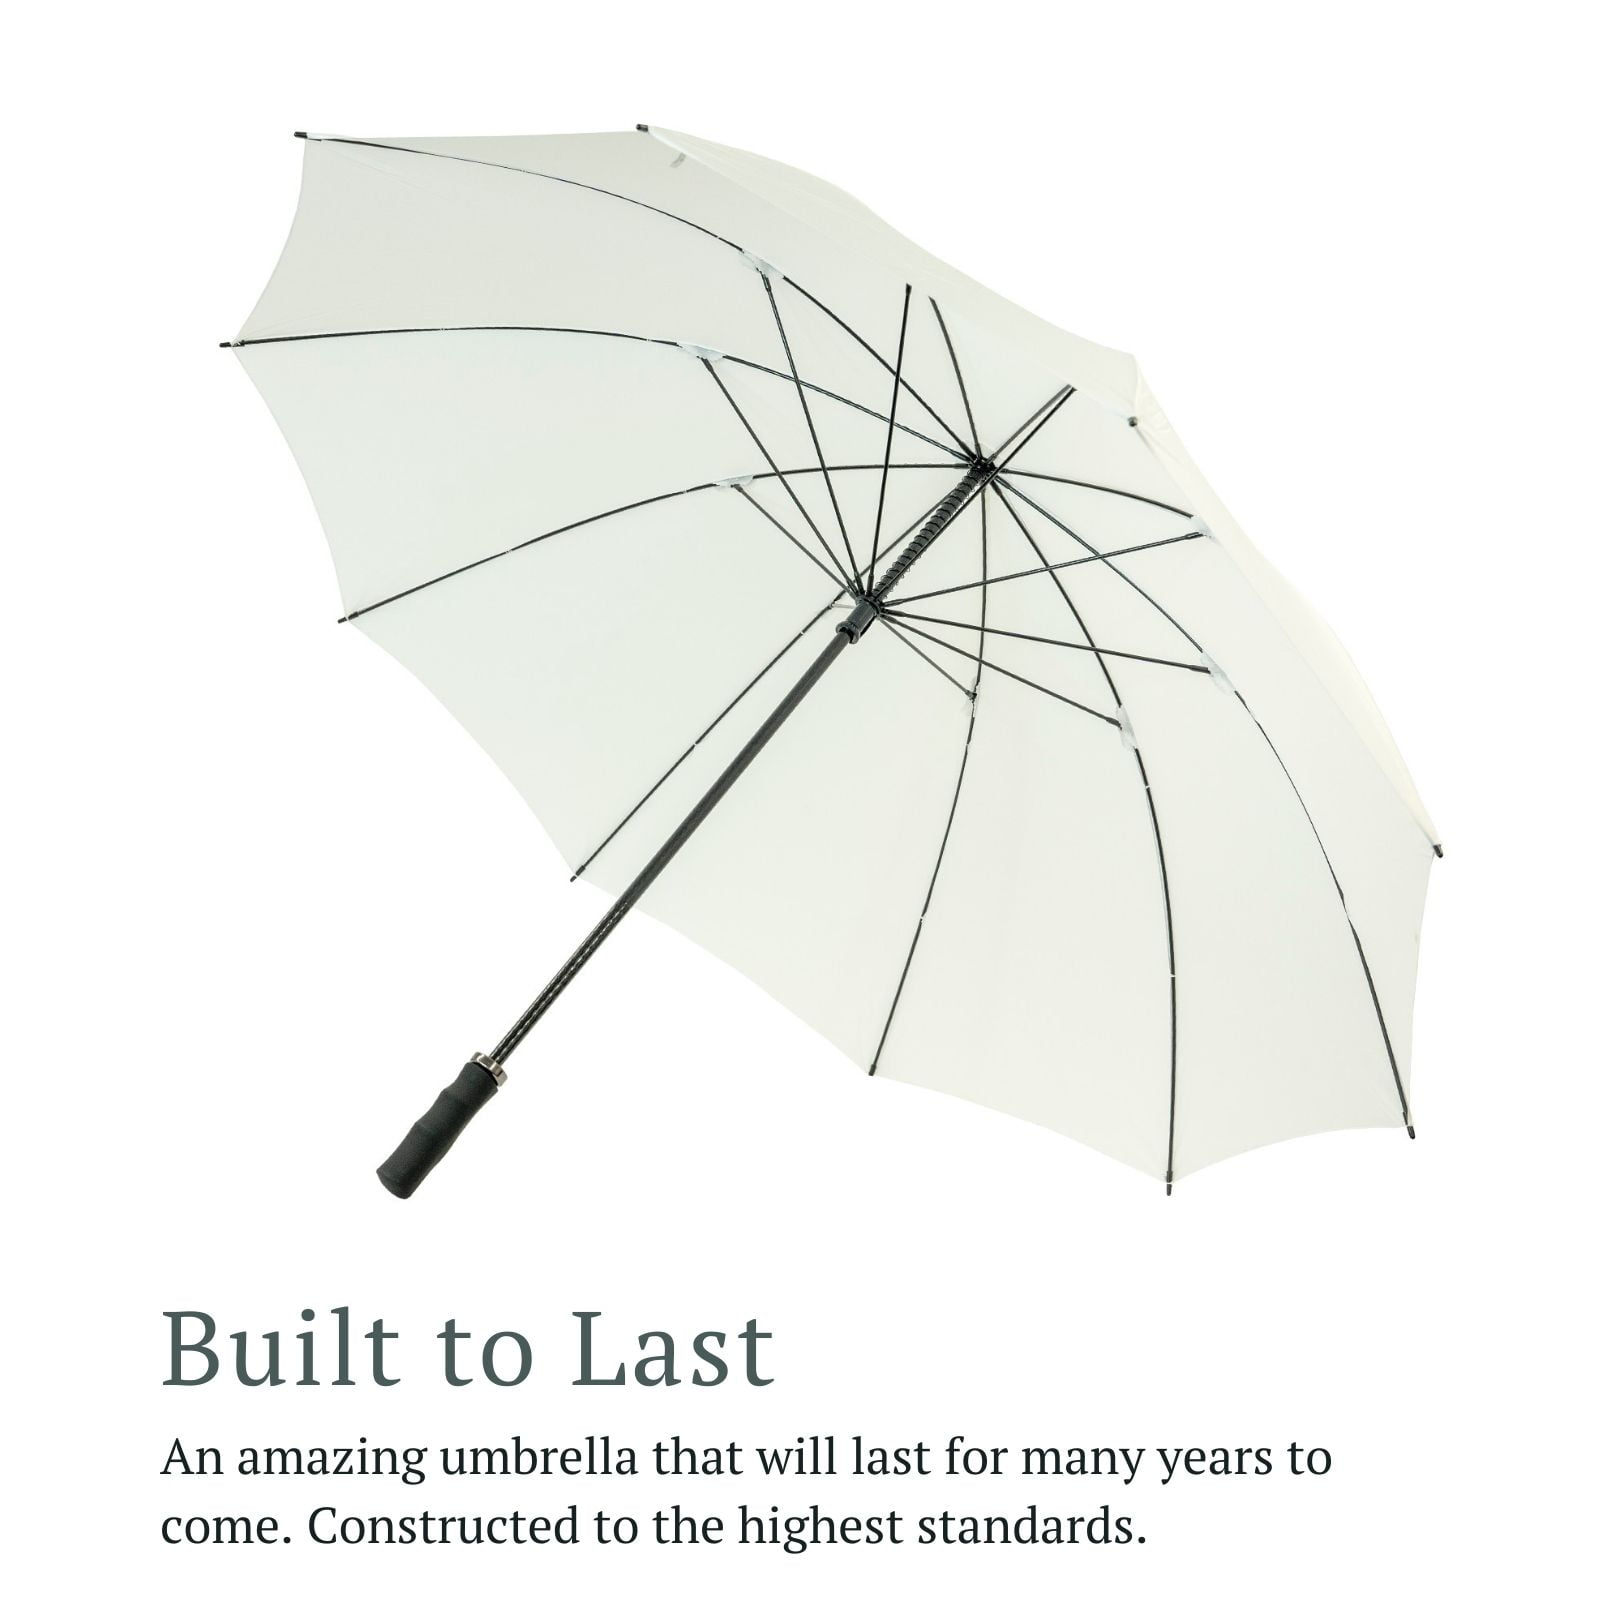 StormStar Windproof White Golf Umbrella infographic about the quality